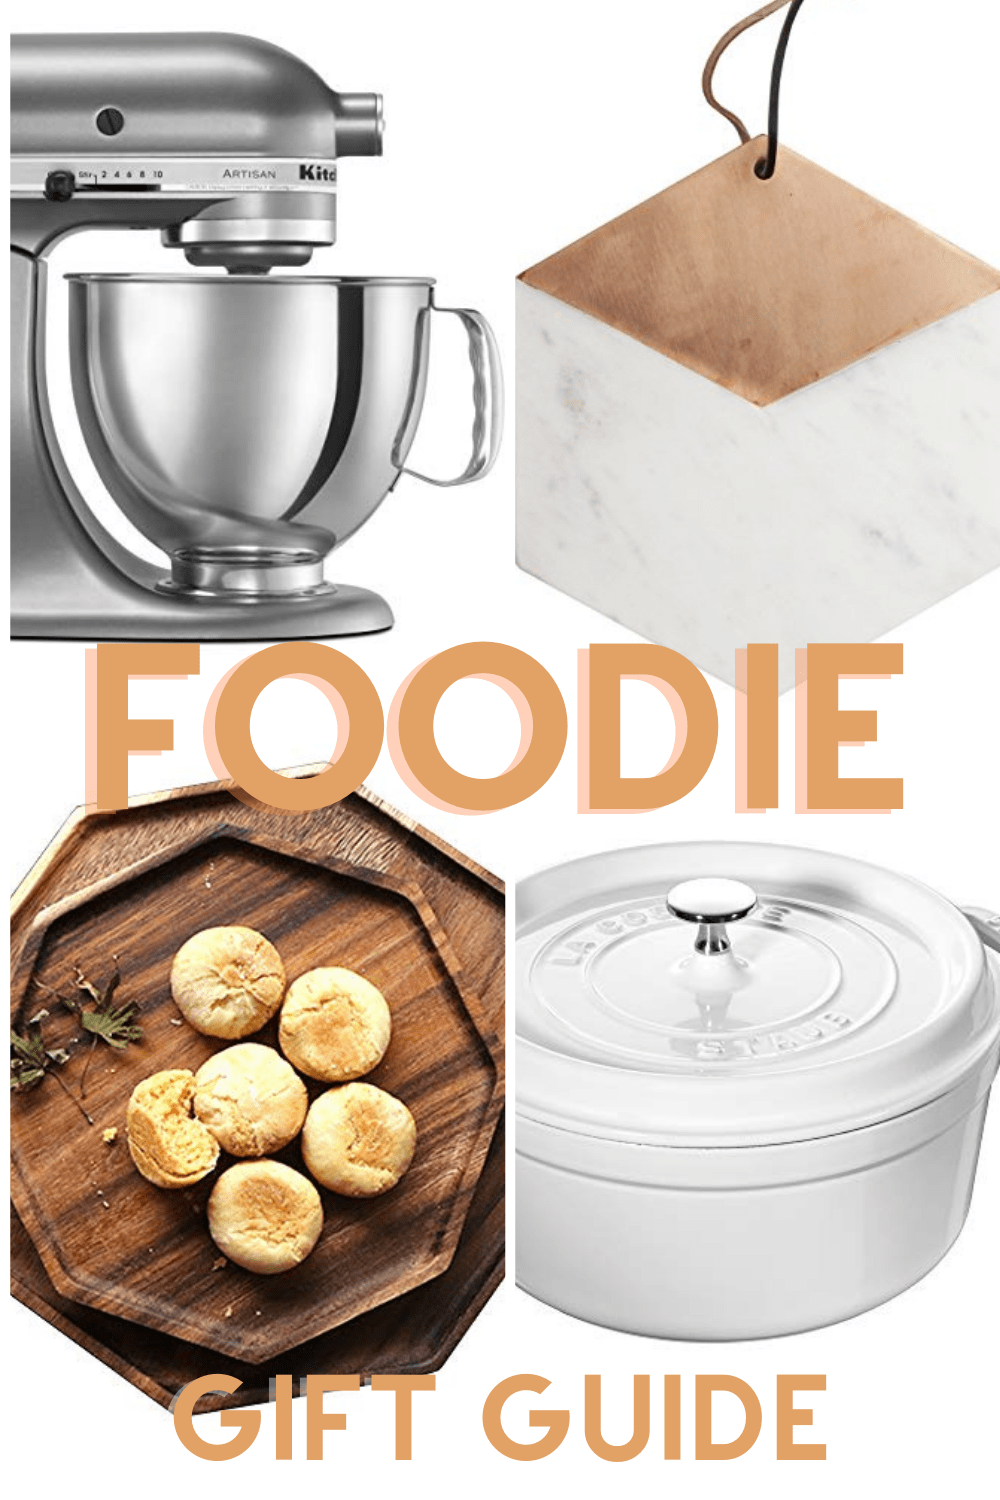 Foodie Gift Guide. The best kitchen tools and gifts for the foodie in your life. Kitchen gift ideas. www.modernhoney.com #foodie #giftguide #kitchentools